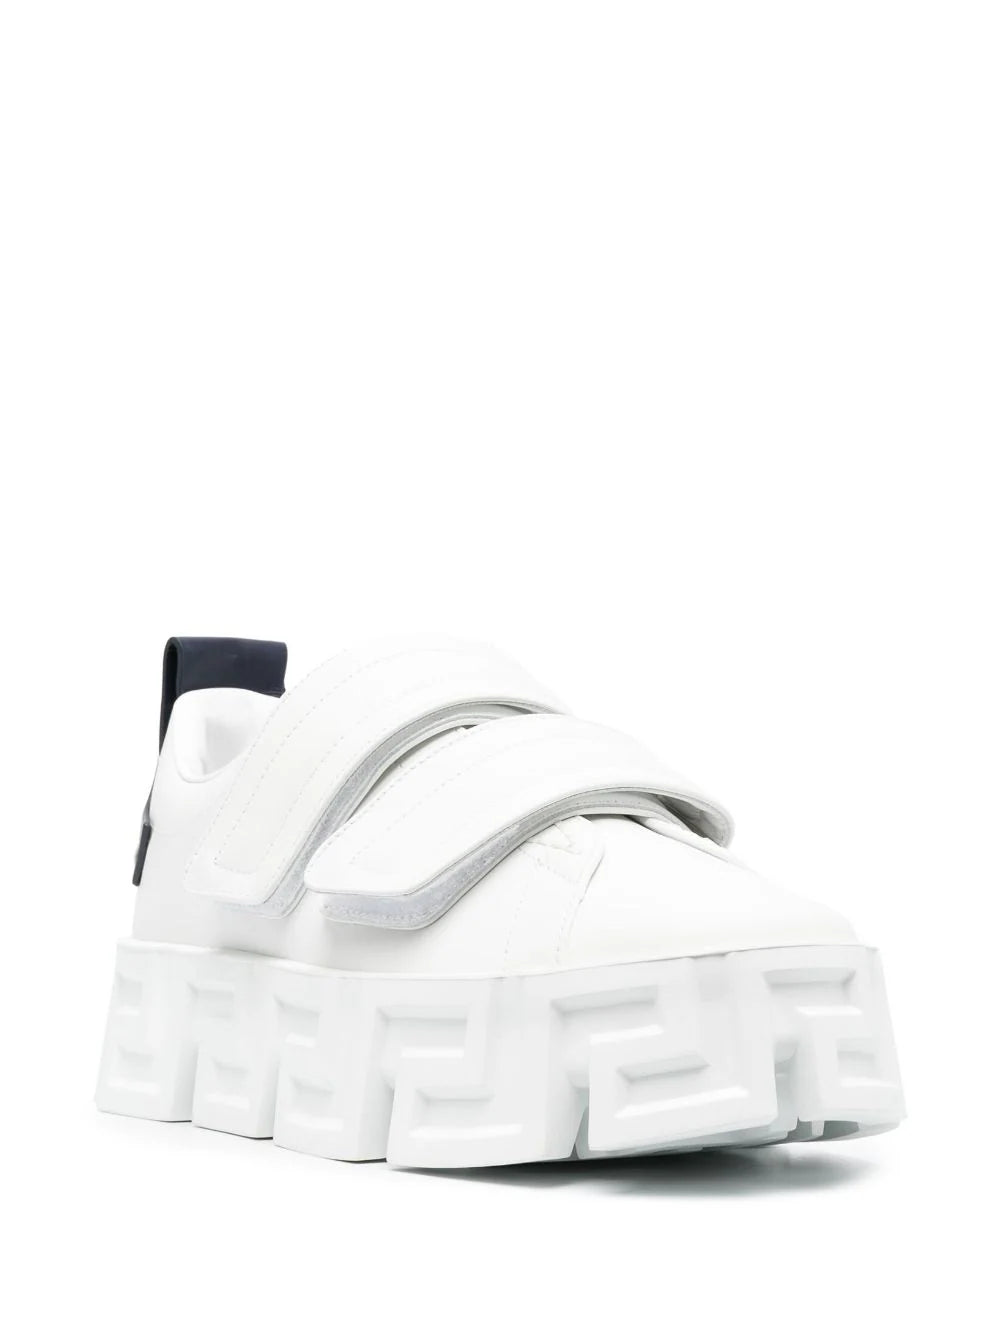 Versace Greca Labyrinth Low-Top Sneakers White